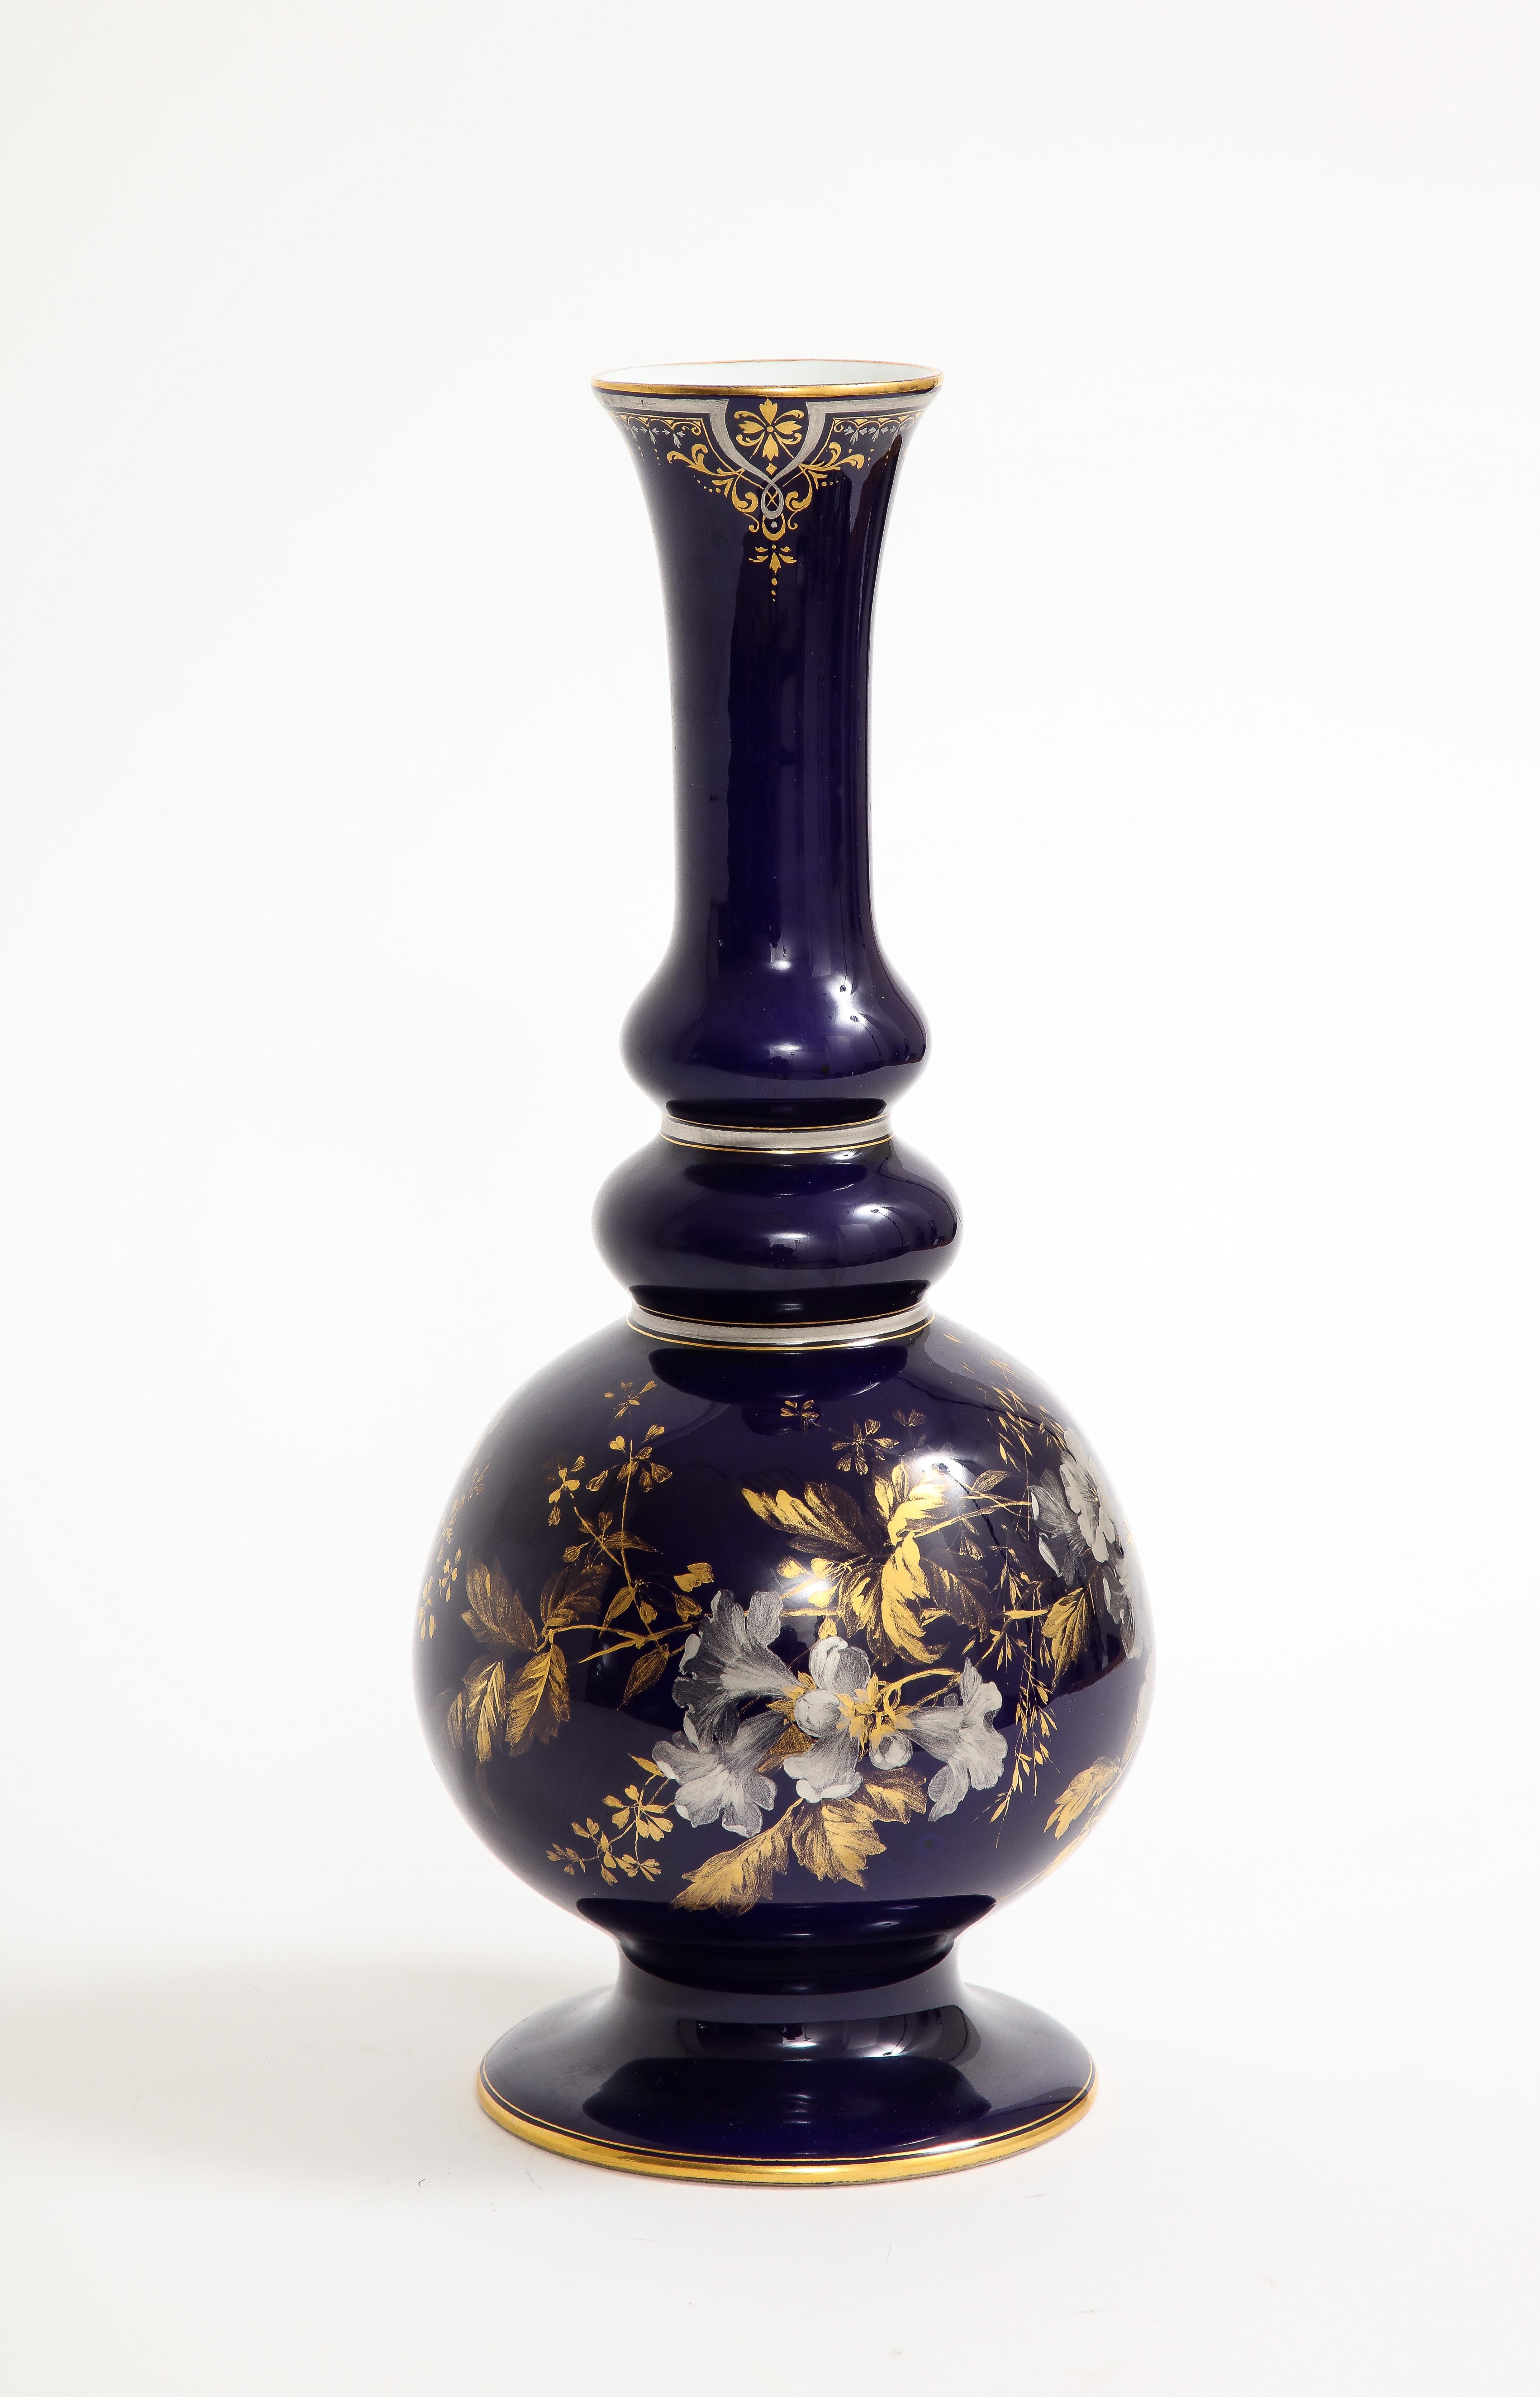 A Highly Important and Rare Meissen Porcelain Cobalt Blue Ground Vase with Platinum and Gold Hand-Painted Decoration.  An exquisite and fine Cobalt Ground 19th Century Meissen porcelain vase with delicate naturalistically depicted hand painted